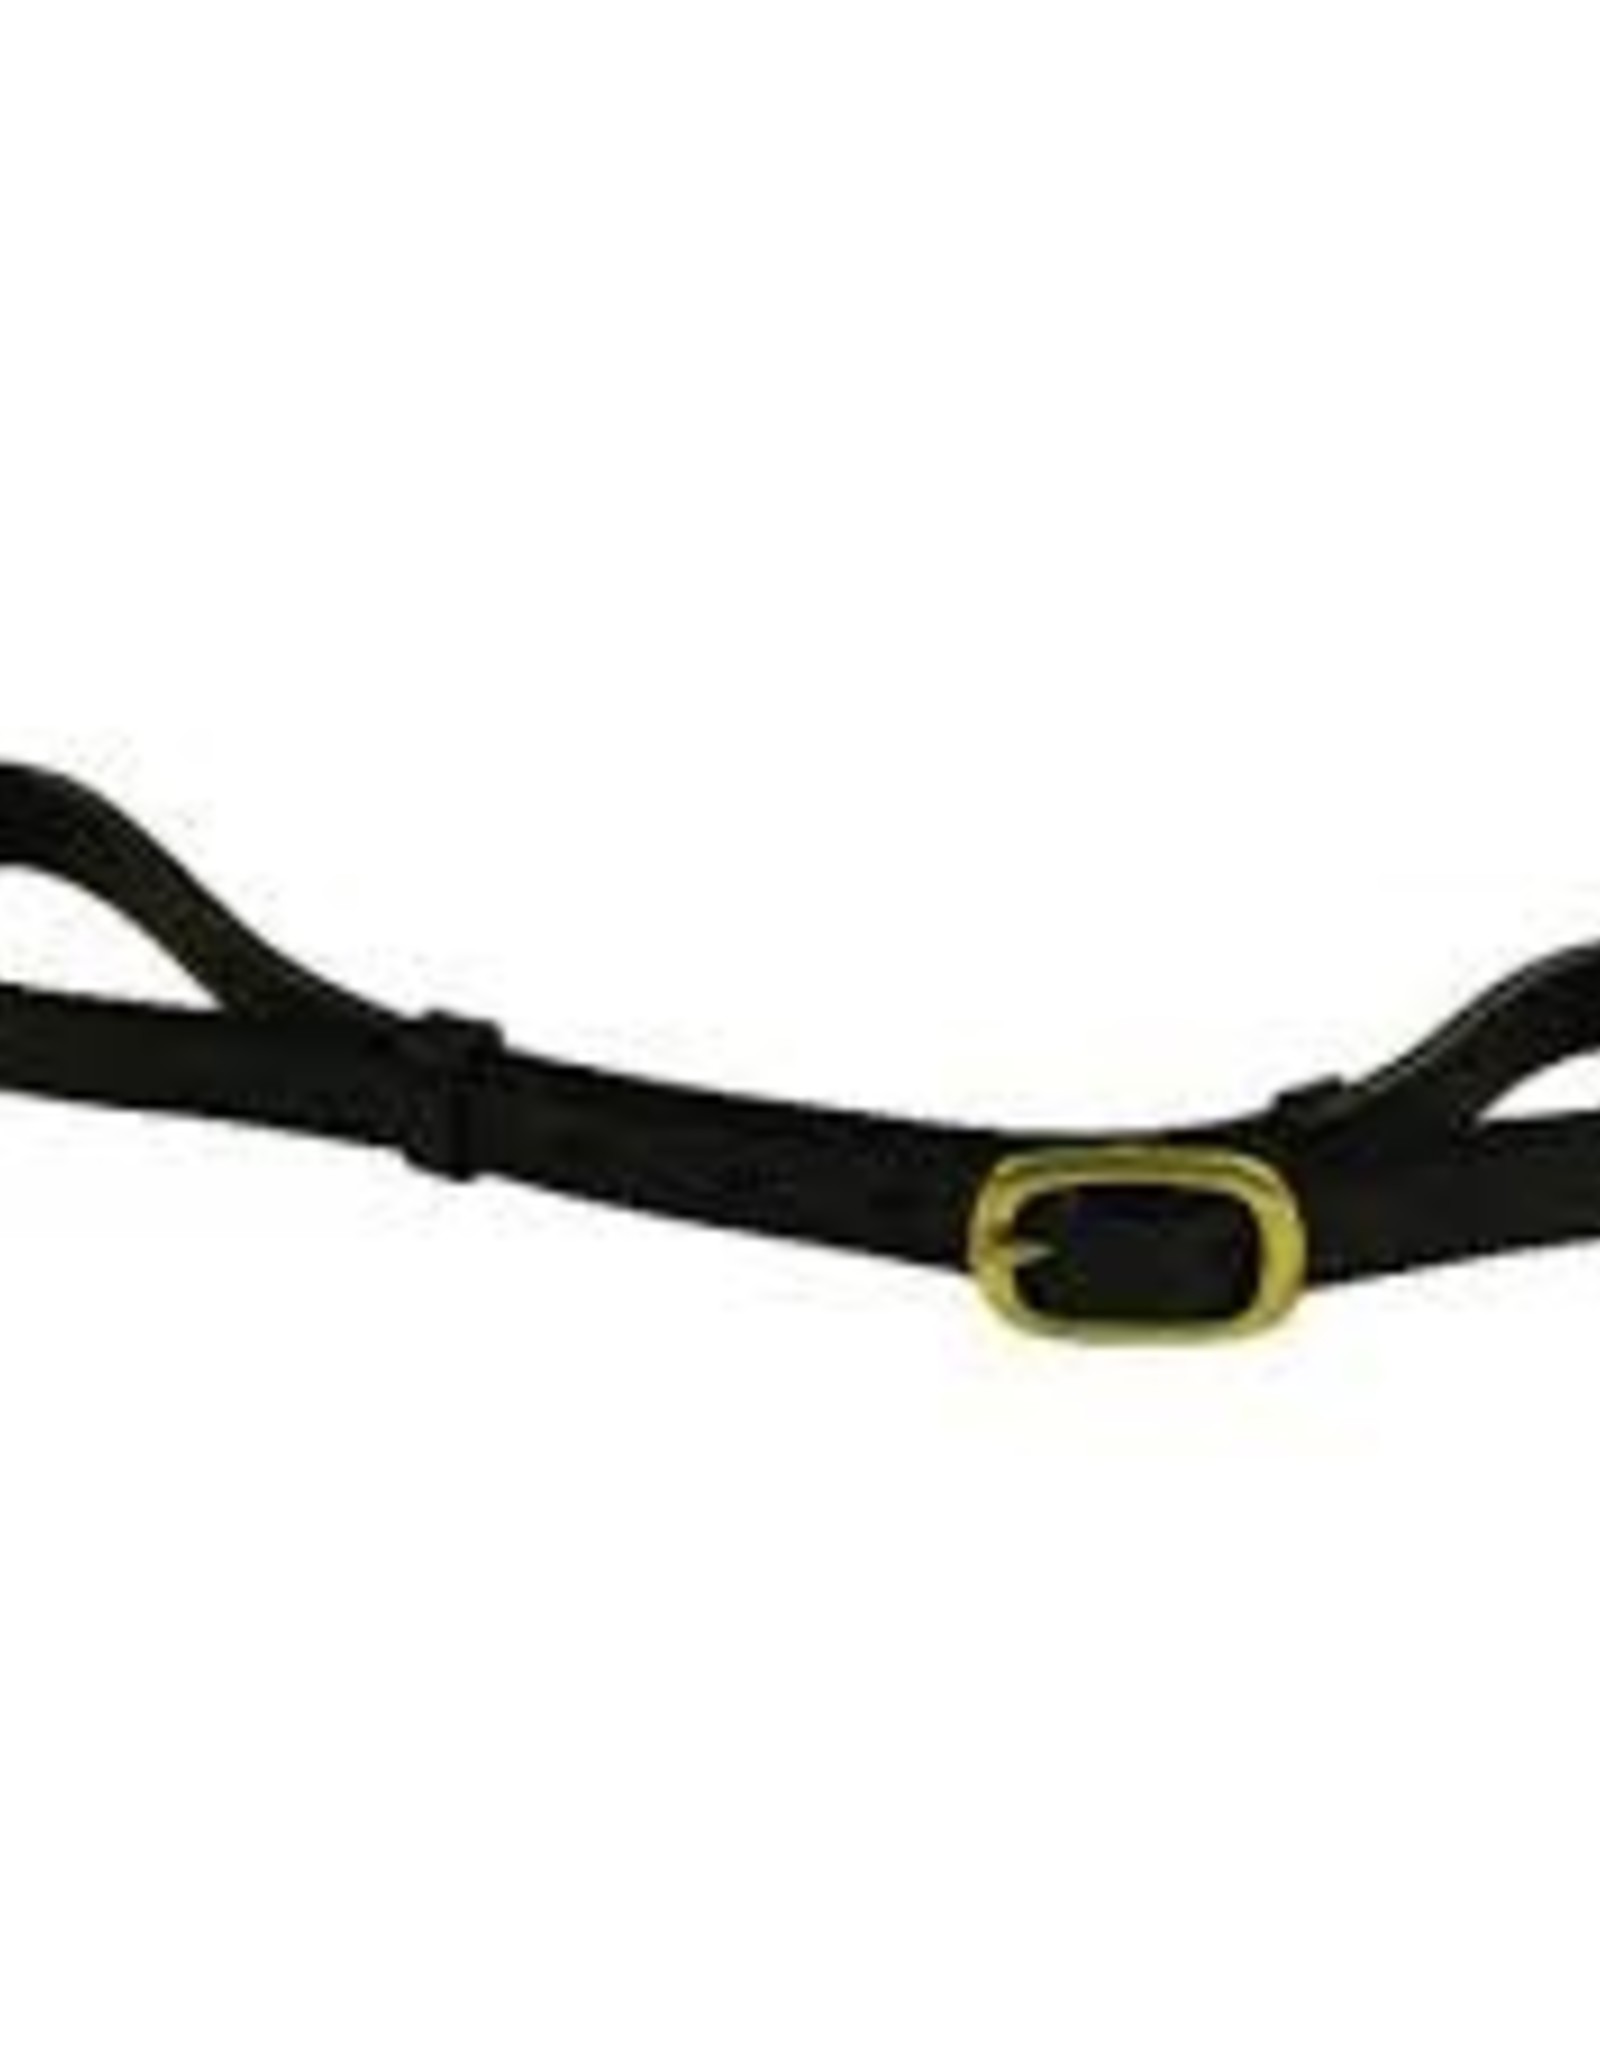 Halter Chin Strap Replacement - Horse size